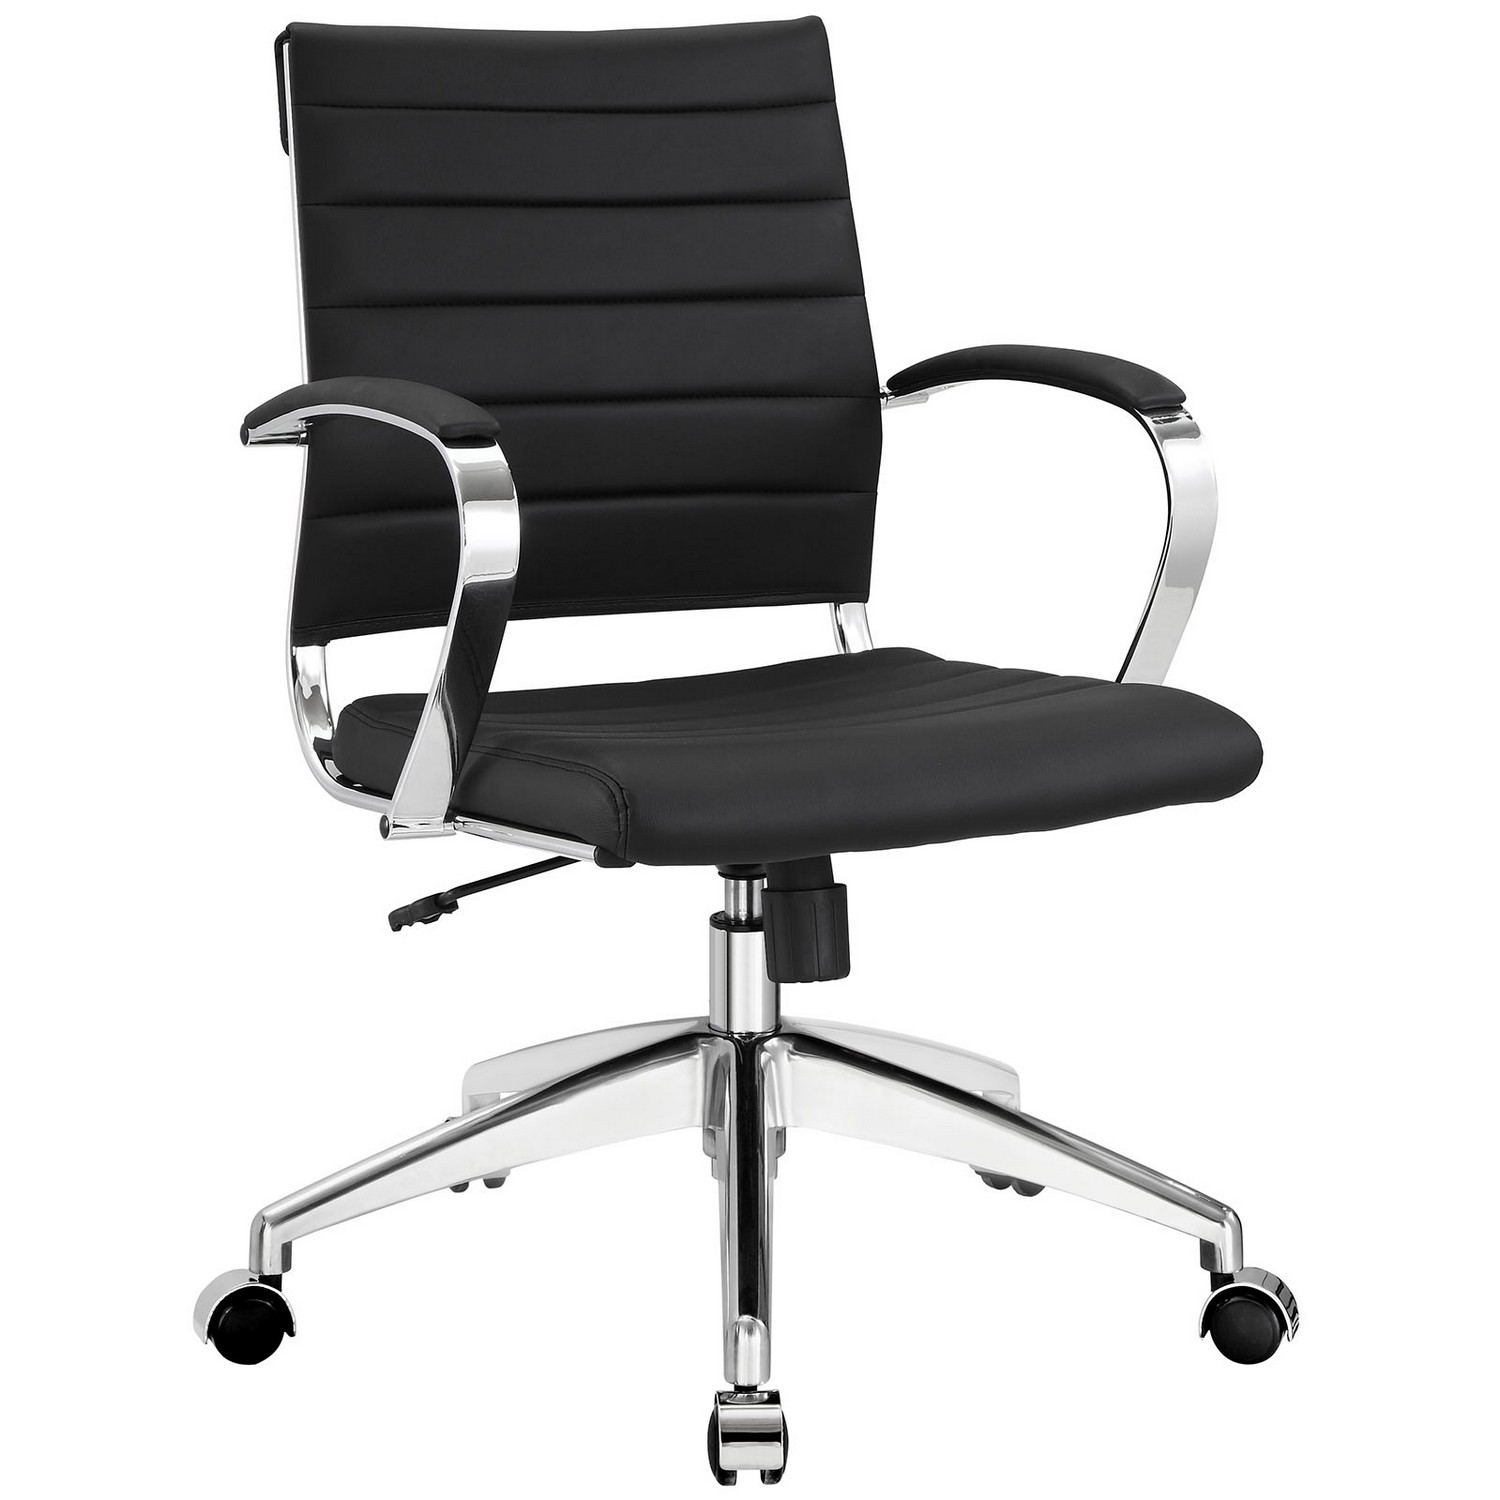 Modway Jive Mid Back Office Chair - Black